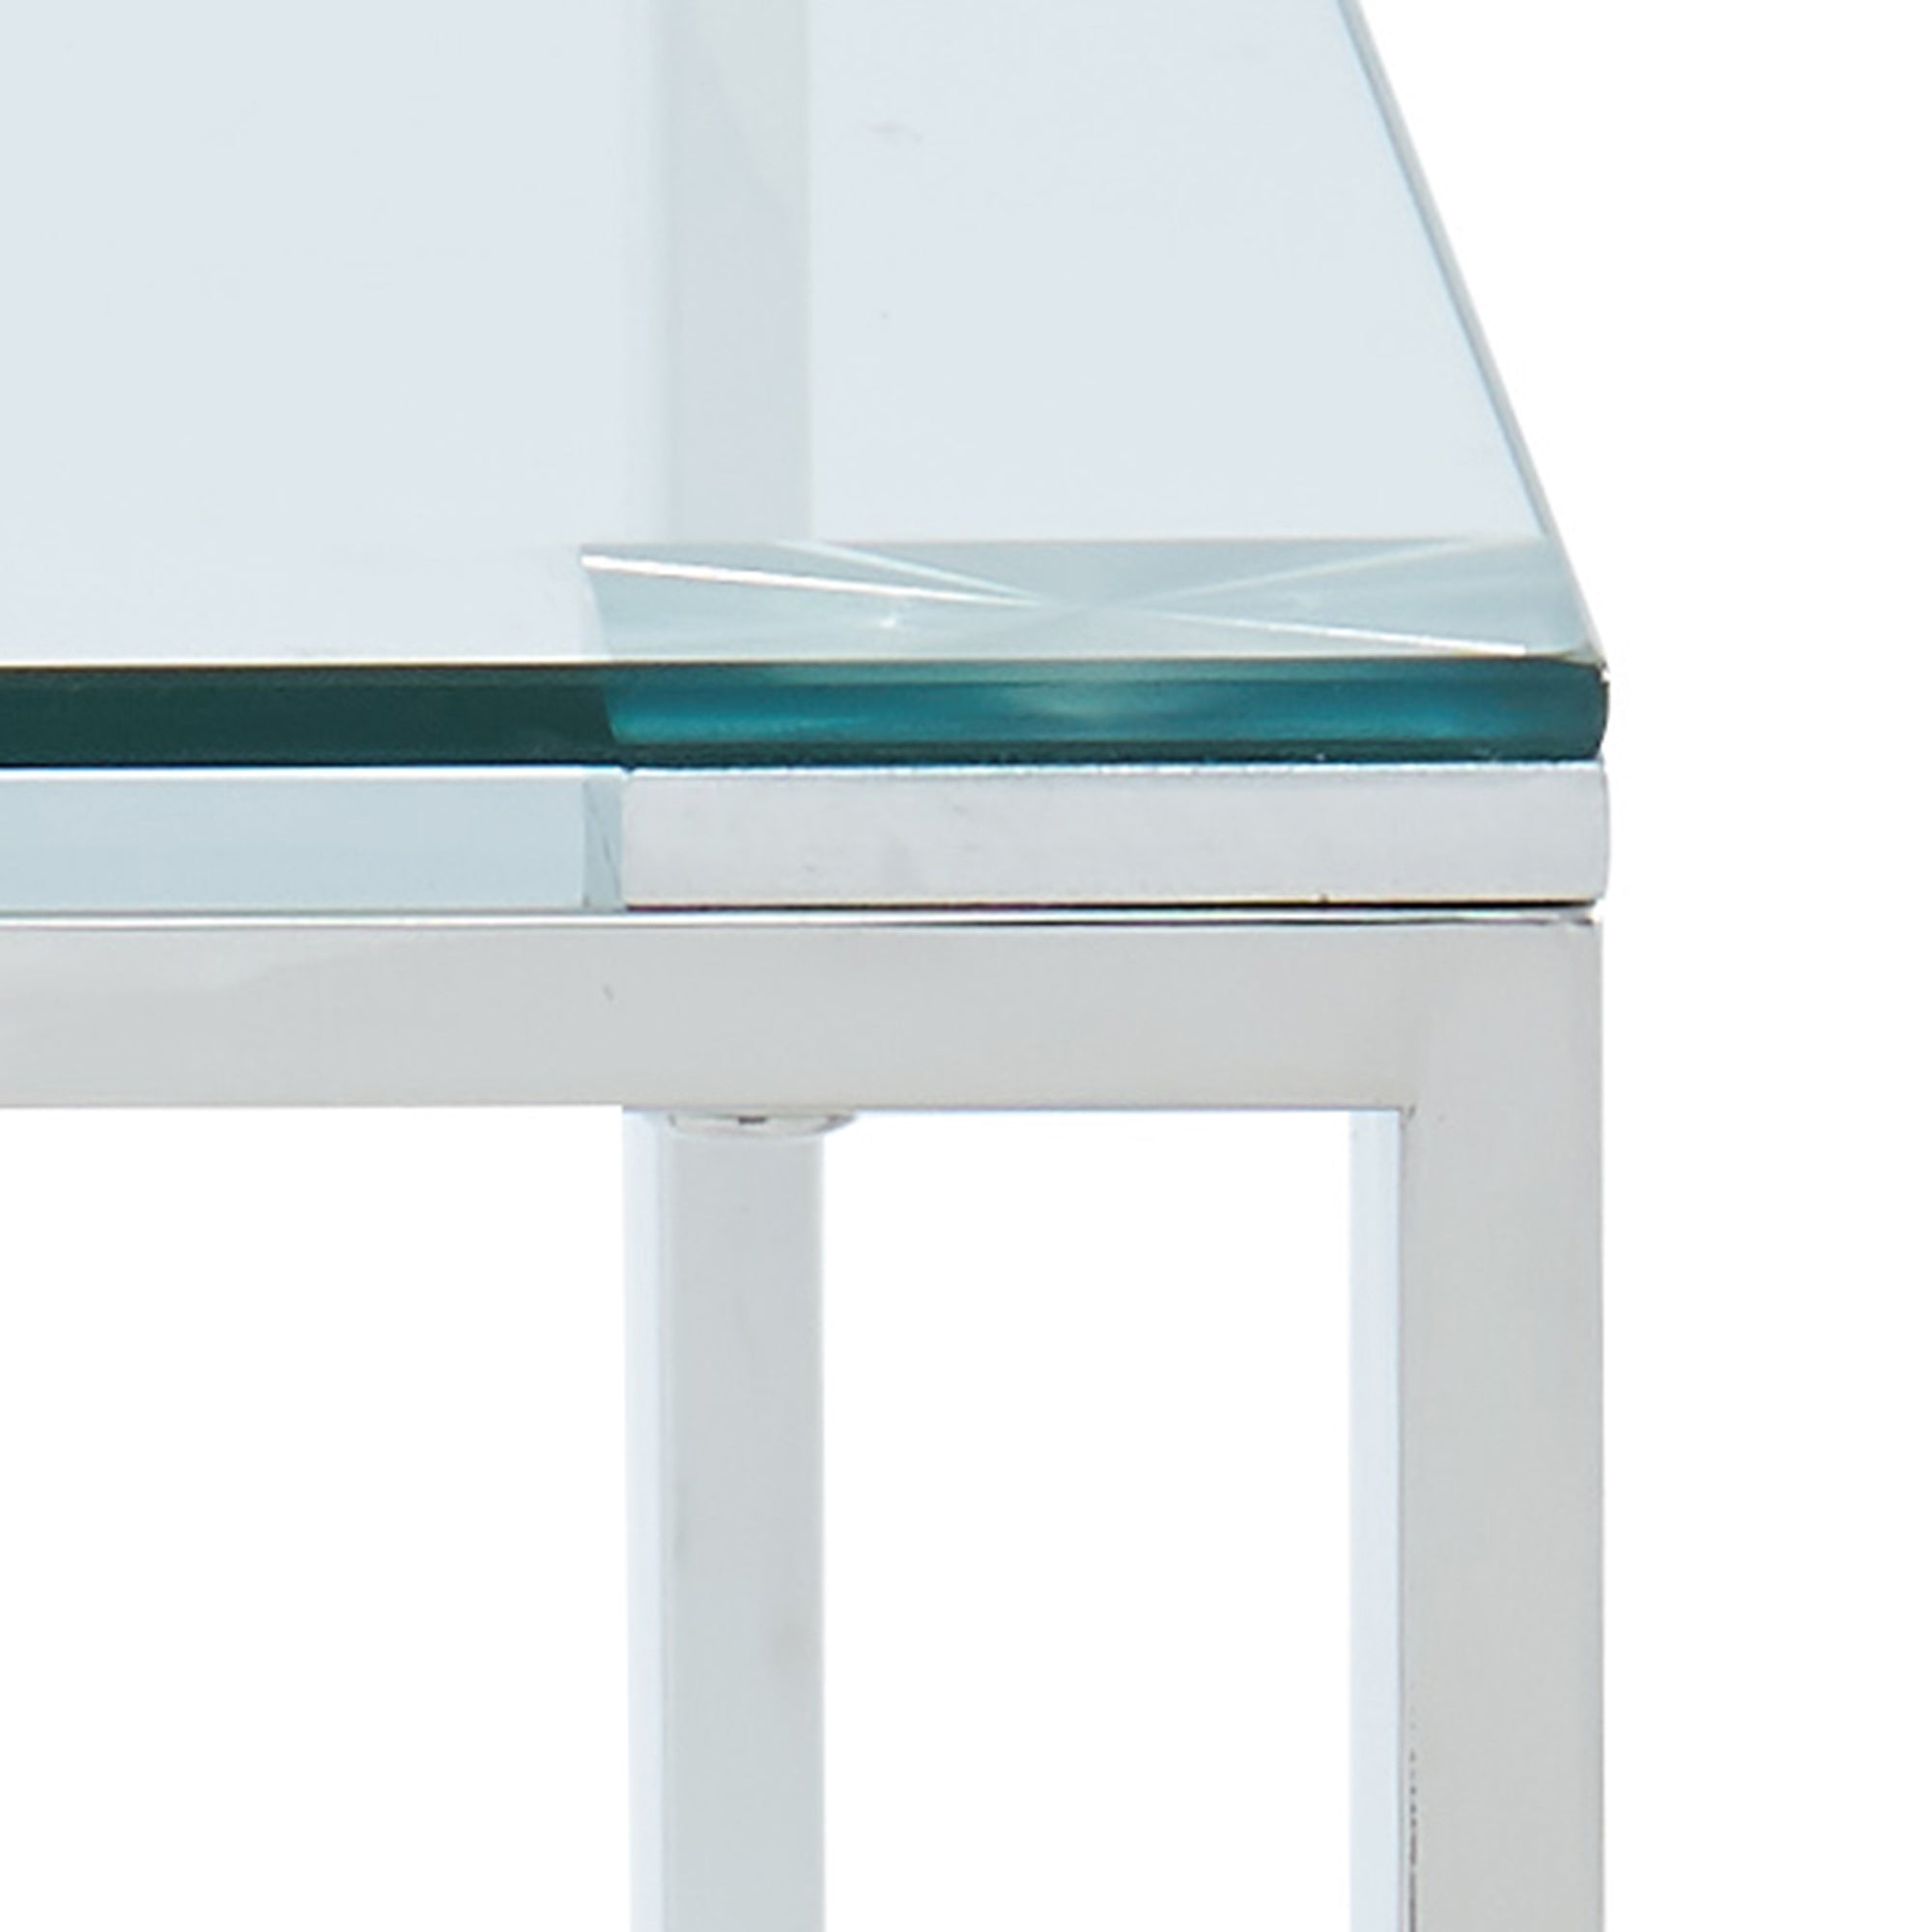 Zevon Accent Table in Silver